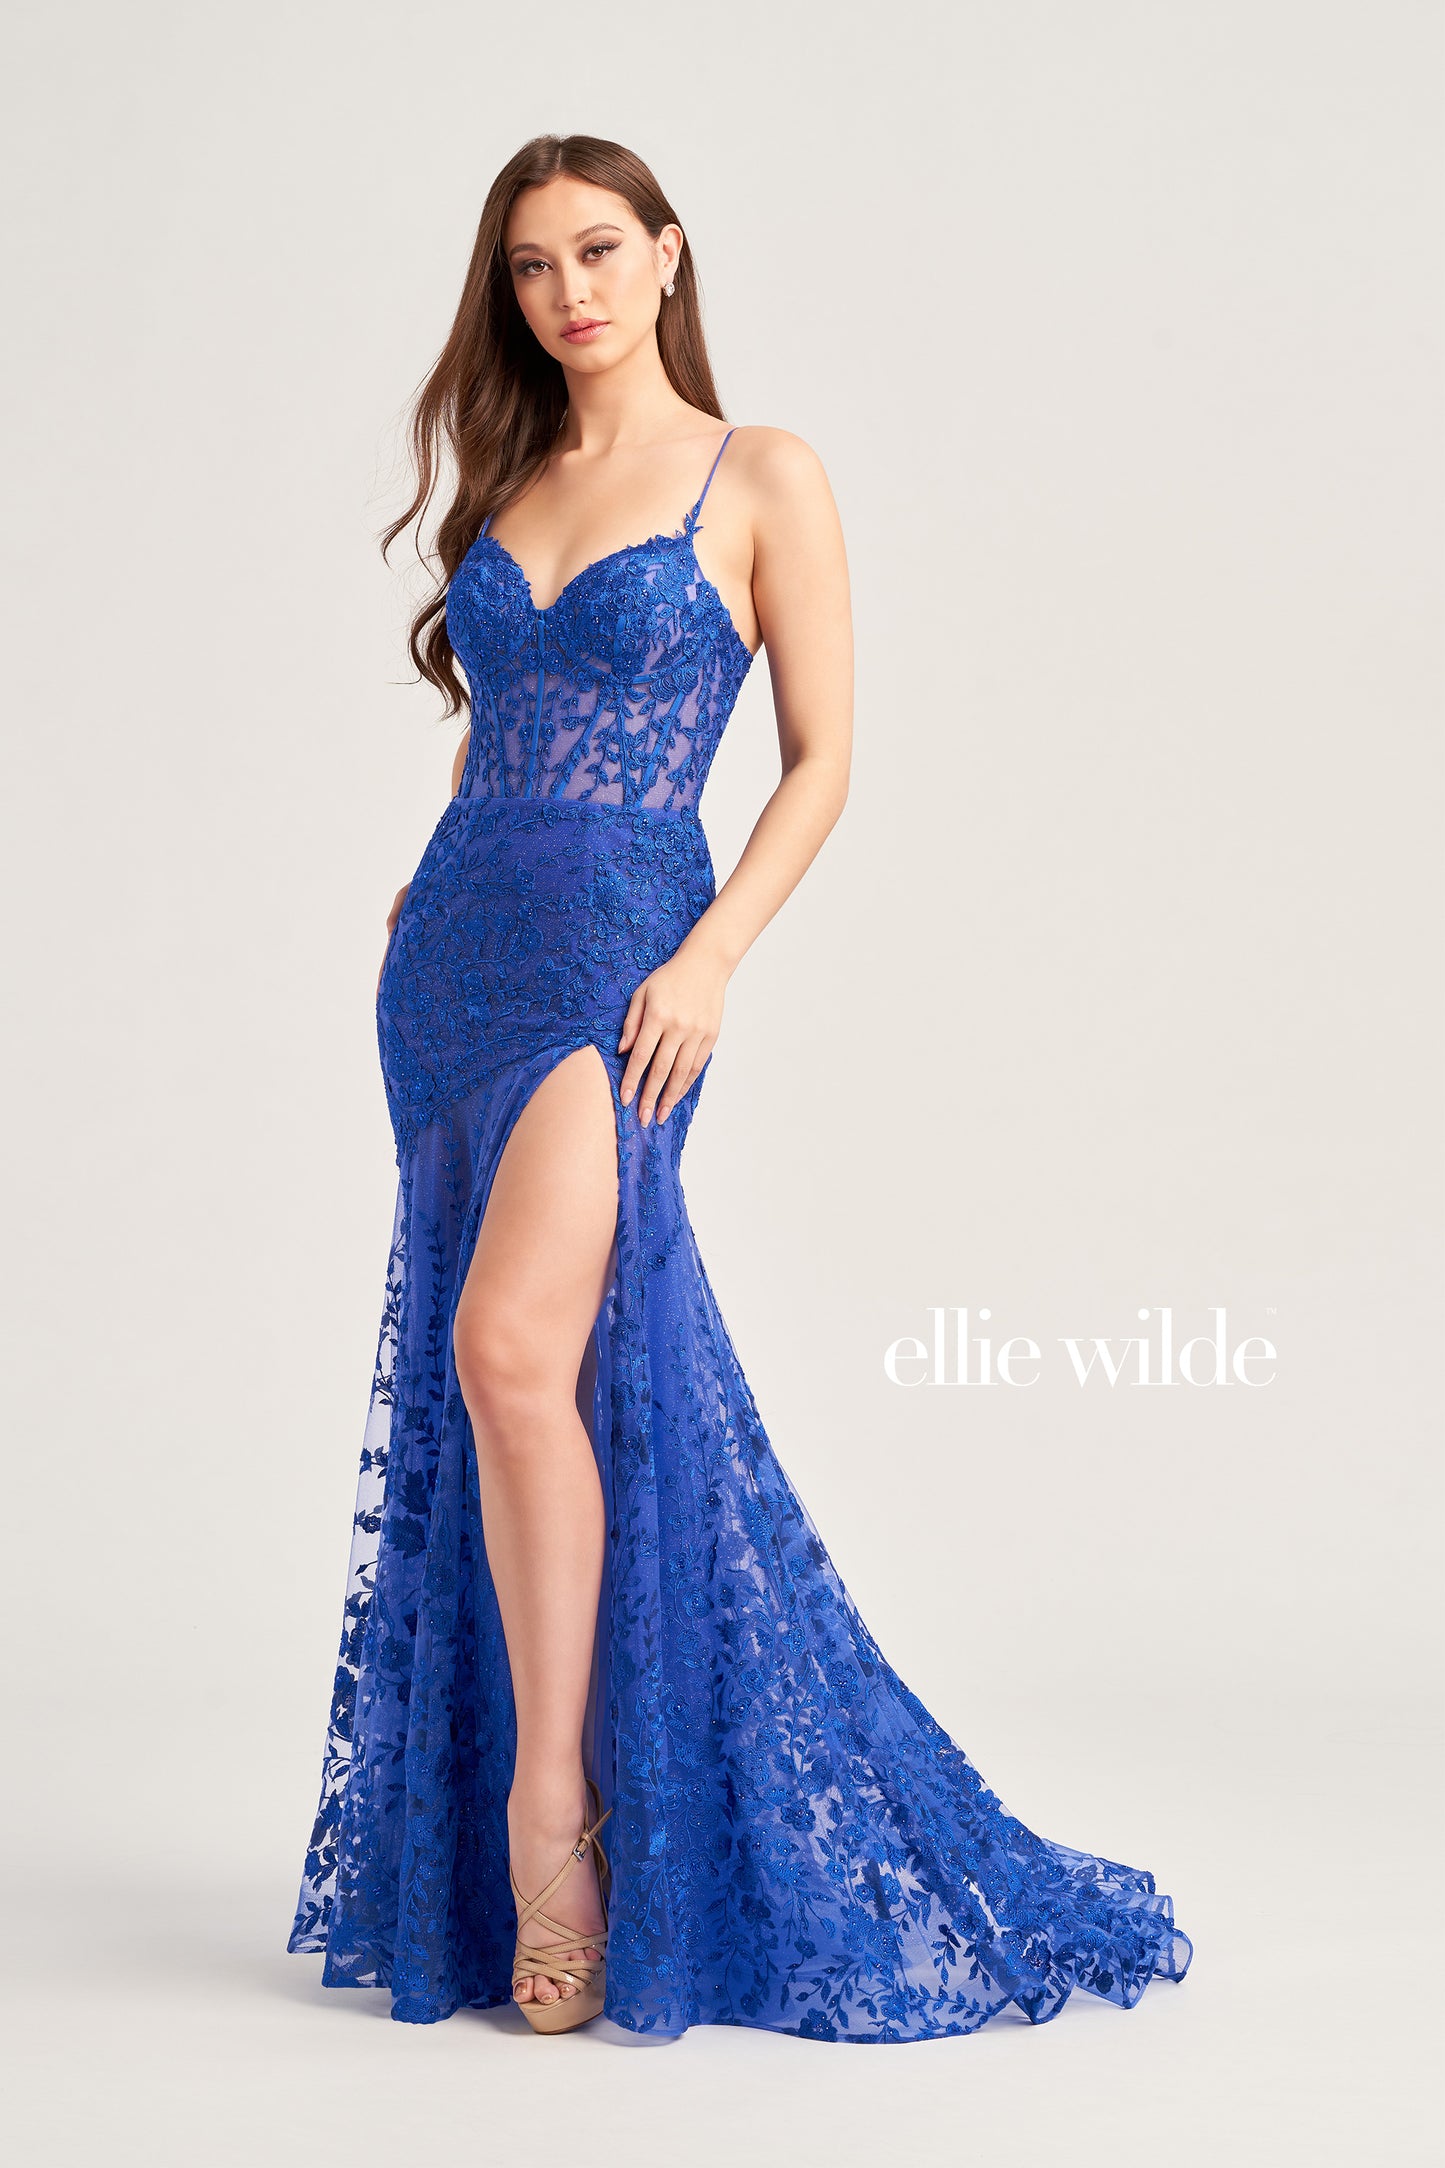 This Ellie Wilde EW35005 Sheer Corset Shimmer Lace Slit Prom Dress Formal Gown adds an elegant touch to formal events. Featuring a sheer corset with shimmer lace and an asymmetrical sheer skirt train, this gorgeous gown will make you stand out. Perfect for the special night.  COLOR: RED, LIGHT YELLOW, LIGHT BLUE, MAGENTA, ROYAL BLUE, EMERALD/NUDE, SAGE SIZE: 00 - 16